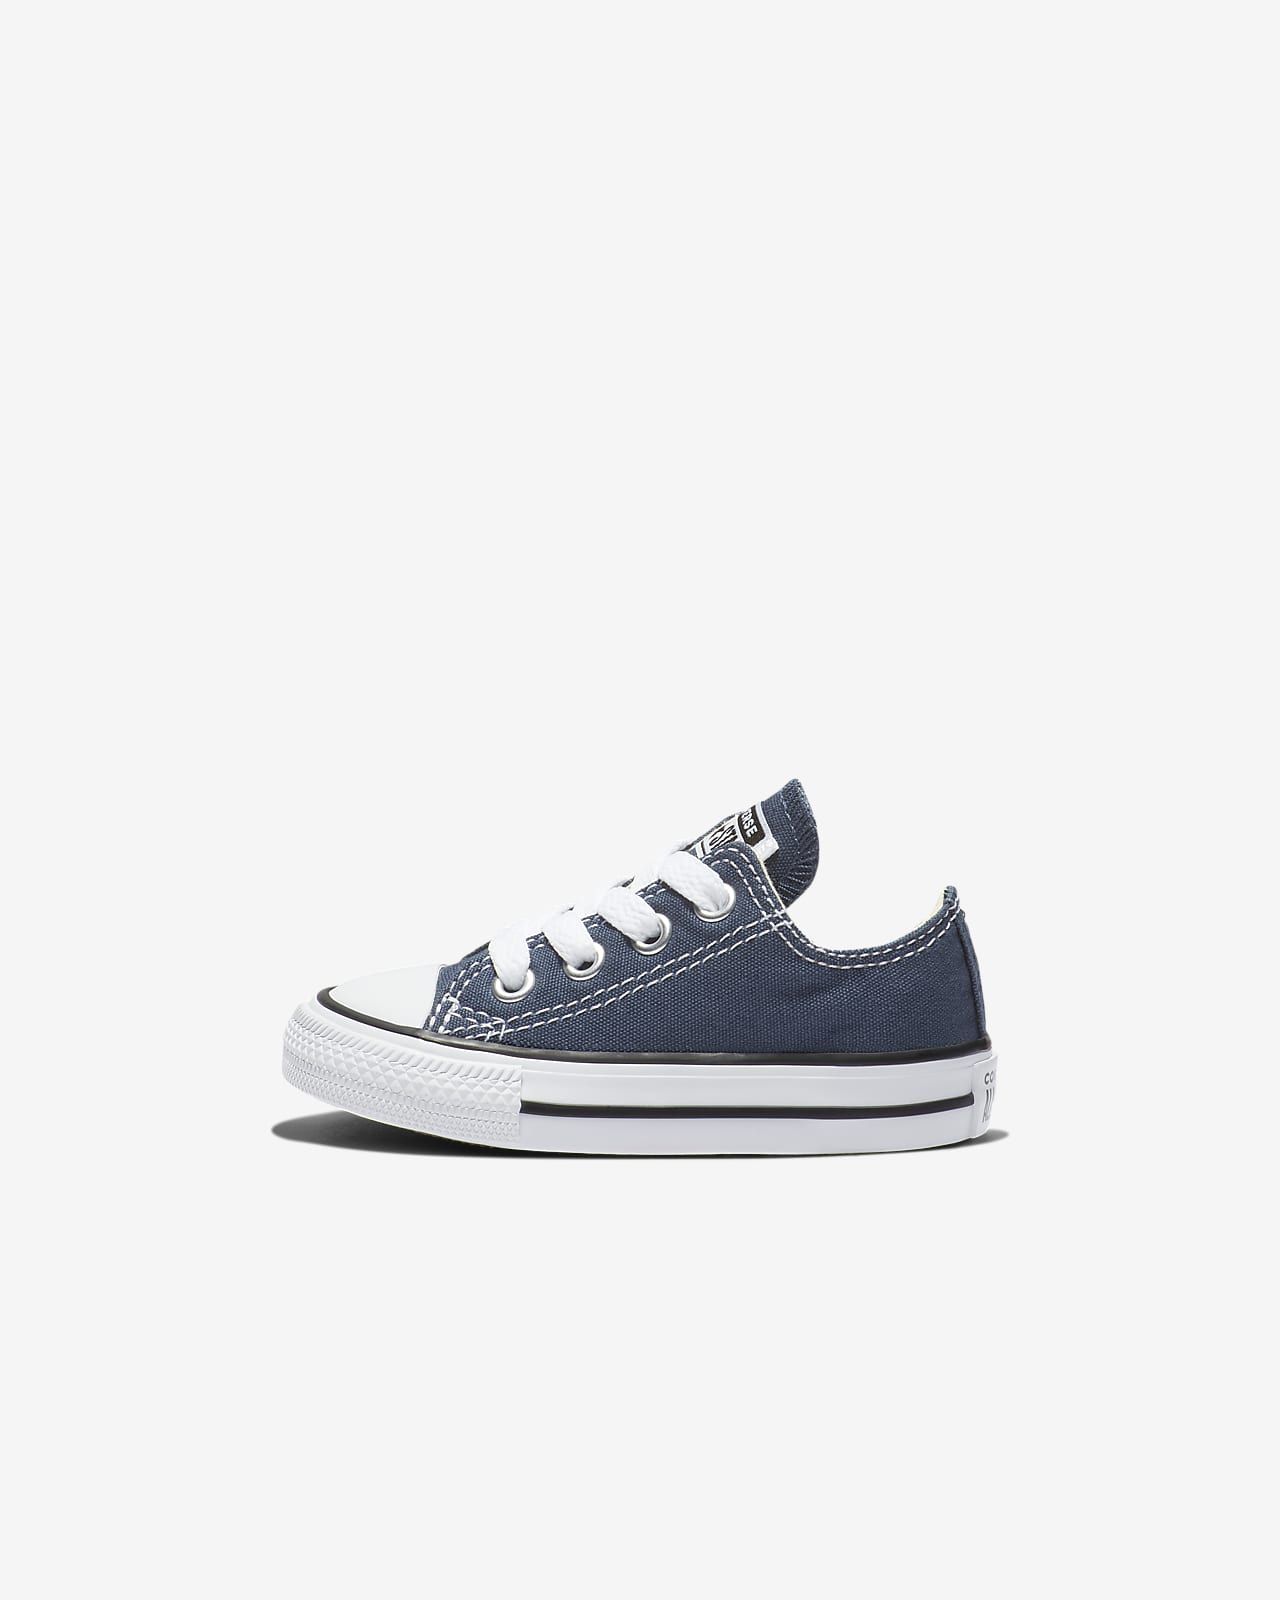 Converse Chuck Taylor All Star Low Top | Nike (US)